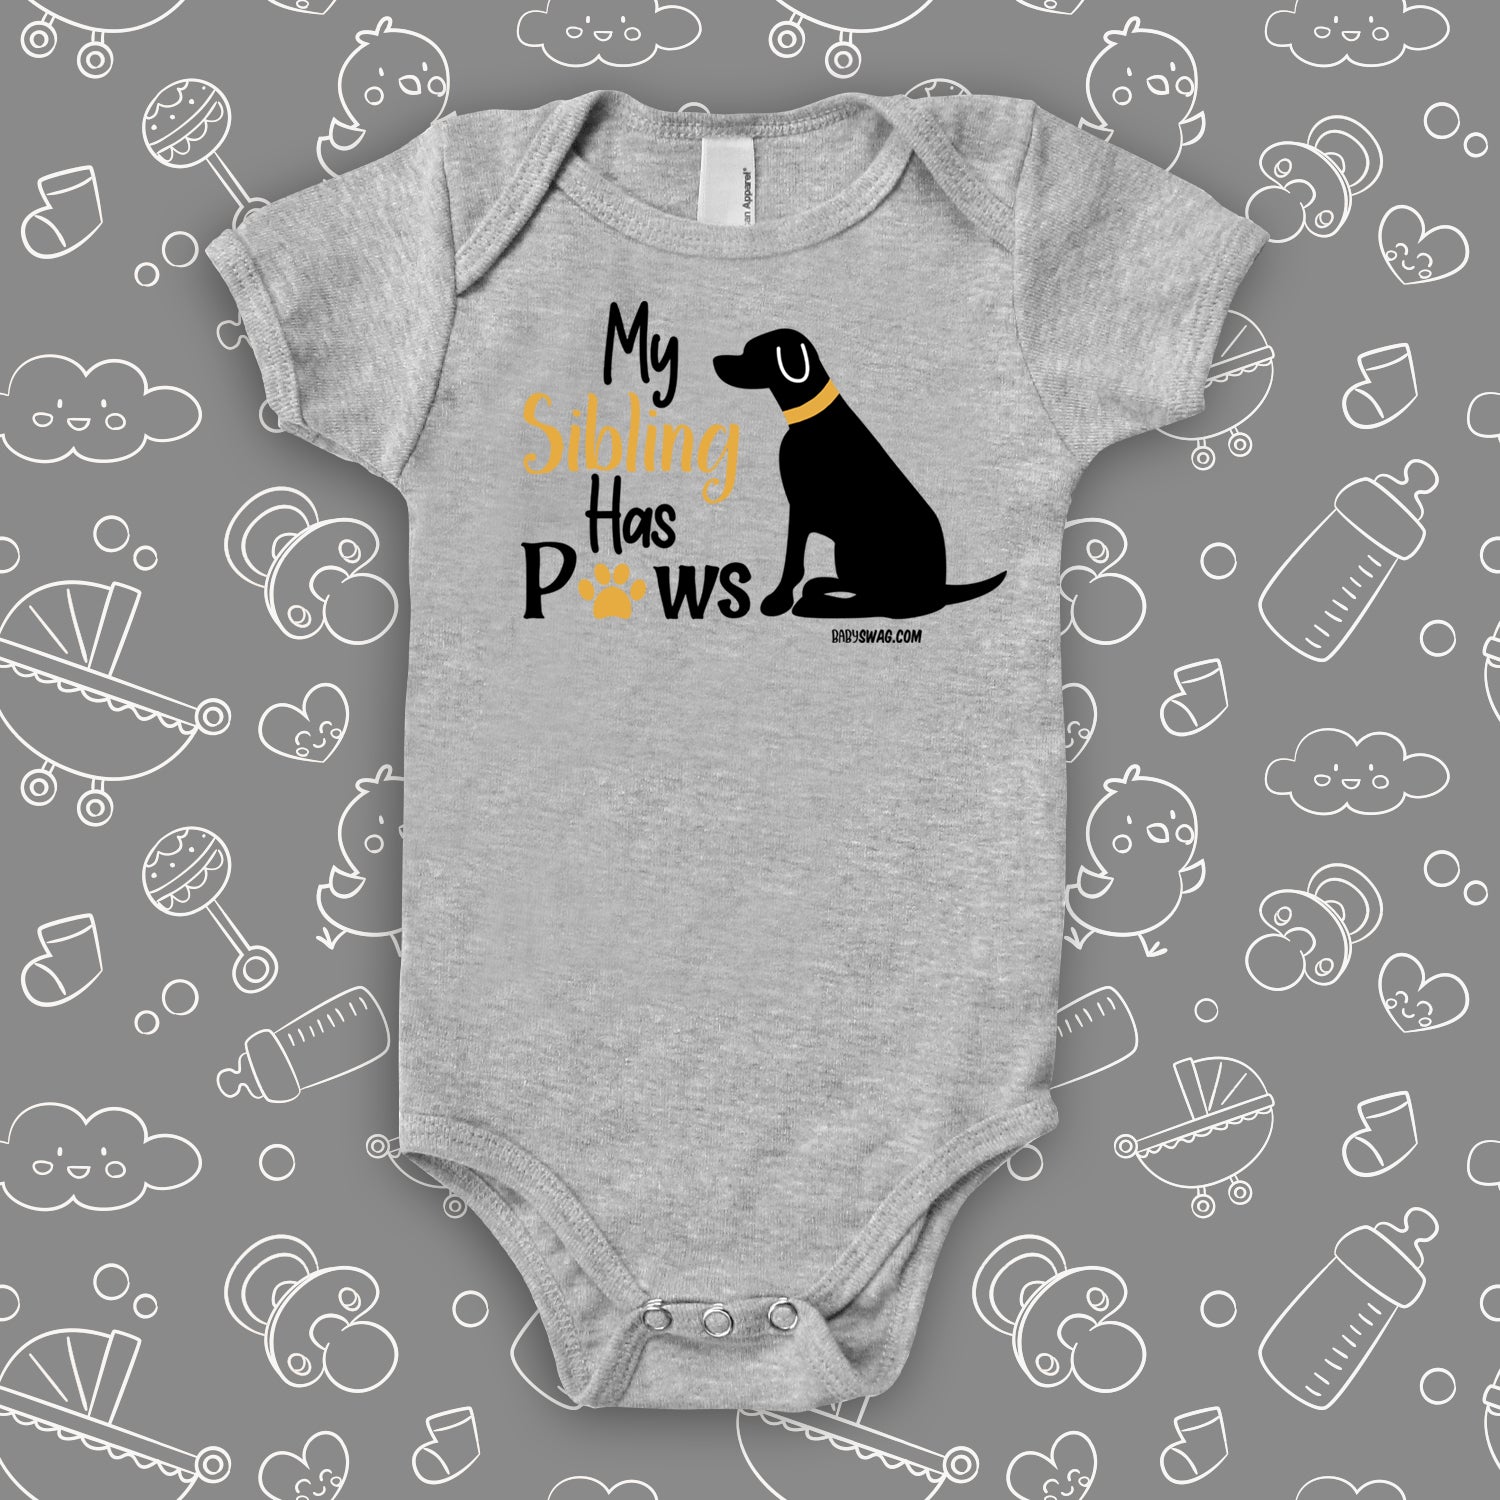 my siblings have paws shirt, funny baby shower gift, funny baby